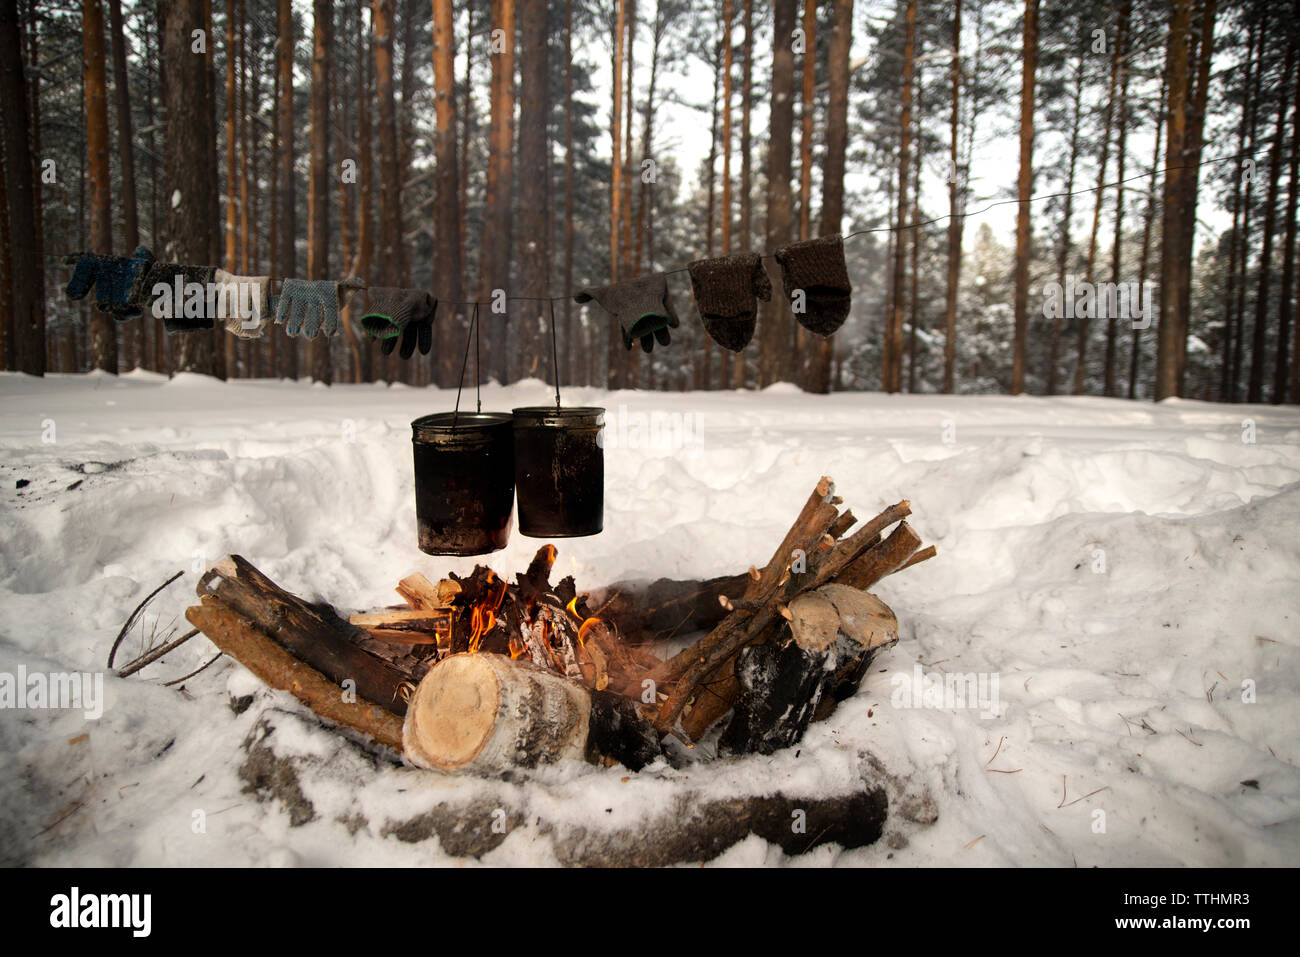 Food being cooked in containers over bonfire at snow covered field in forest Stock Photo